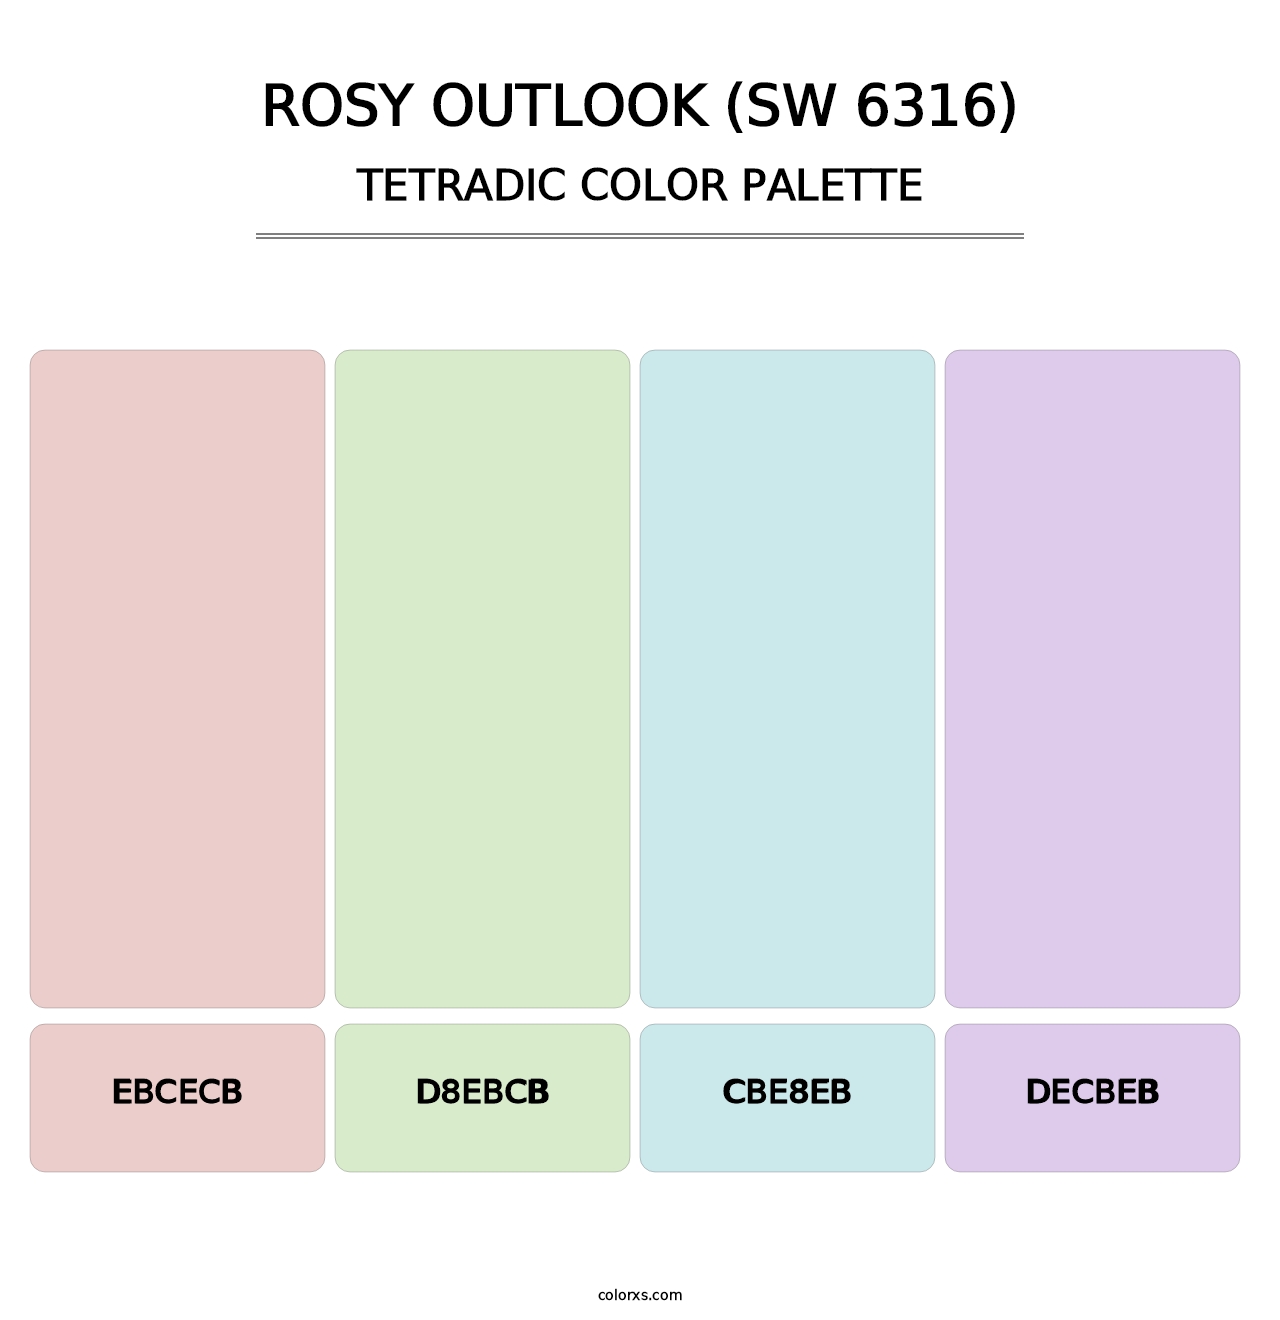 Rosy Outlook (SW 6316) - Tetradic Color Palette